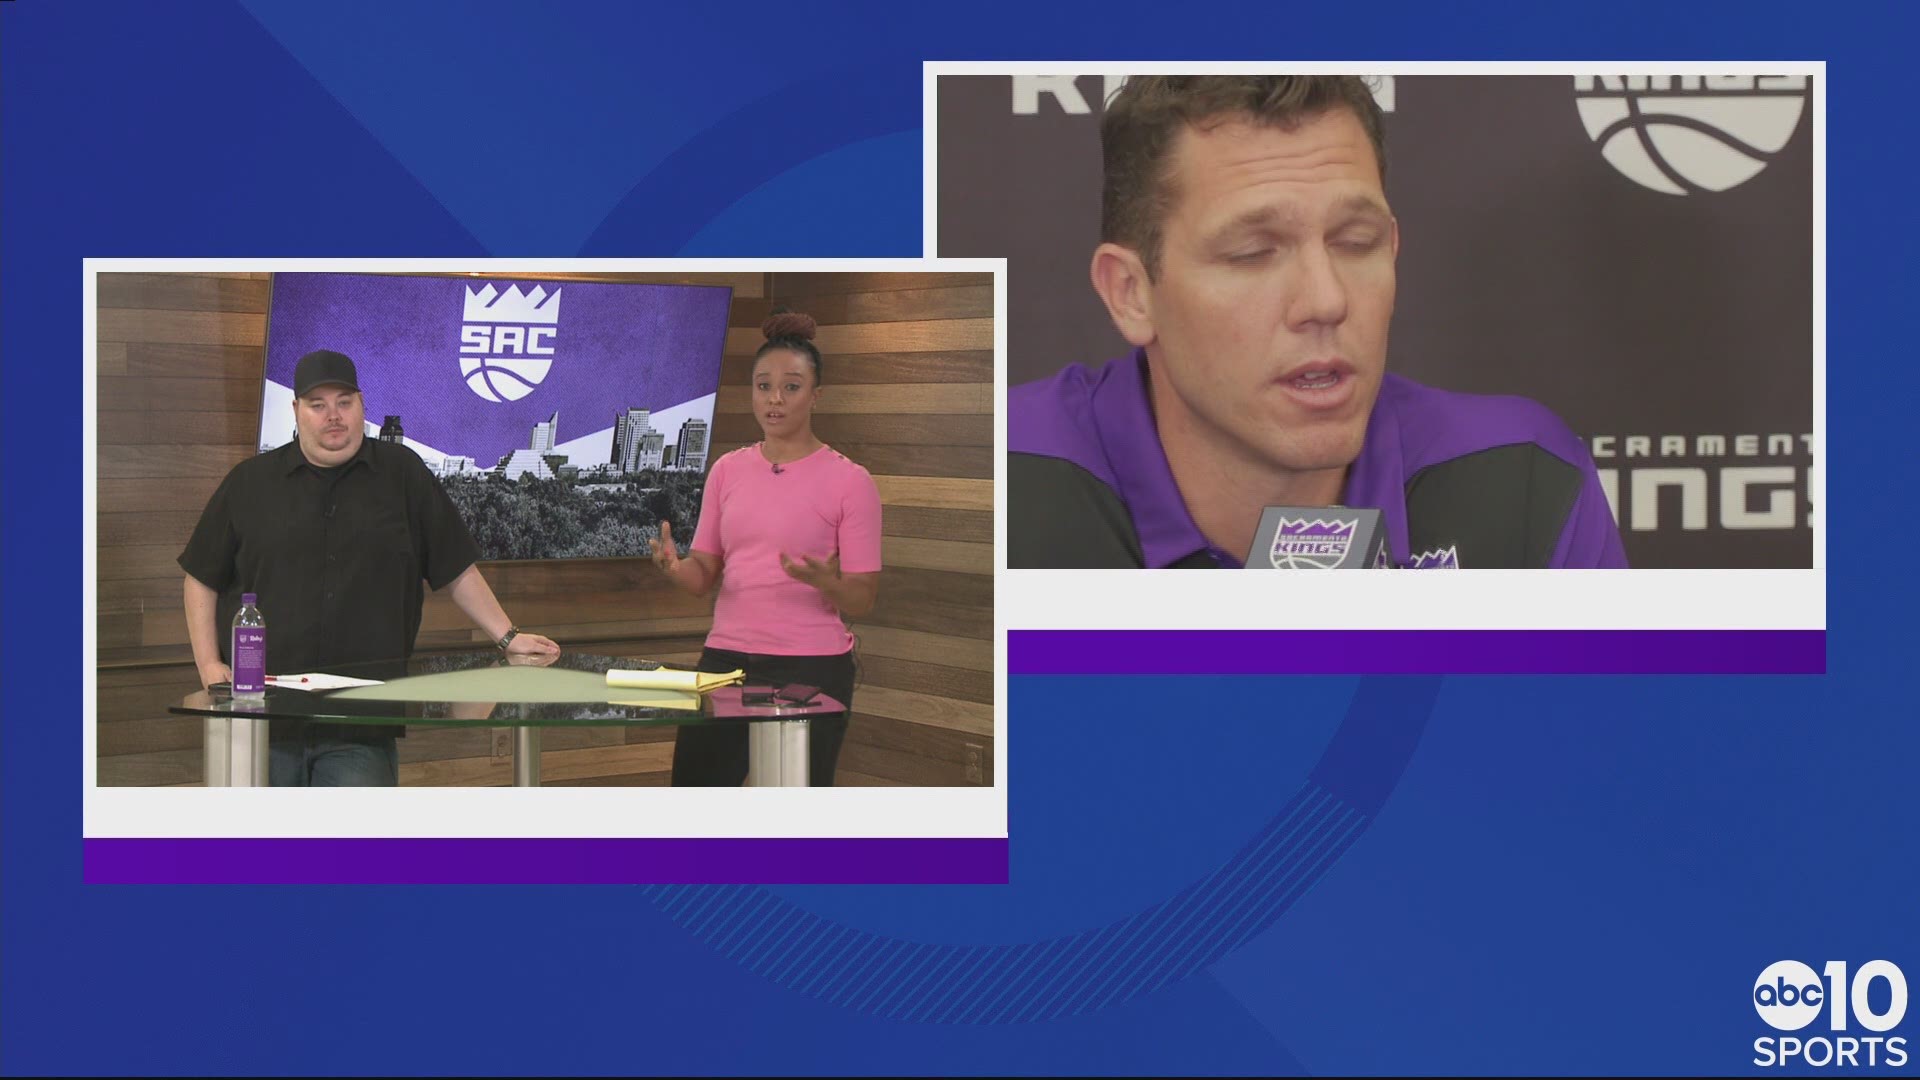 One week after the Sacramento Kings introduced Luke Walton as their new head coach, claims of sexual assault dating back to 2014 have surfaced.